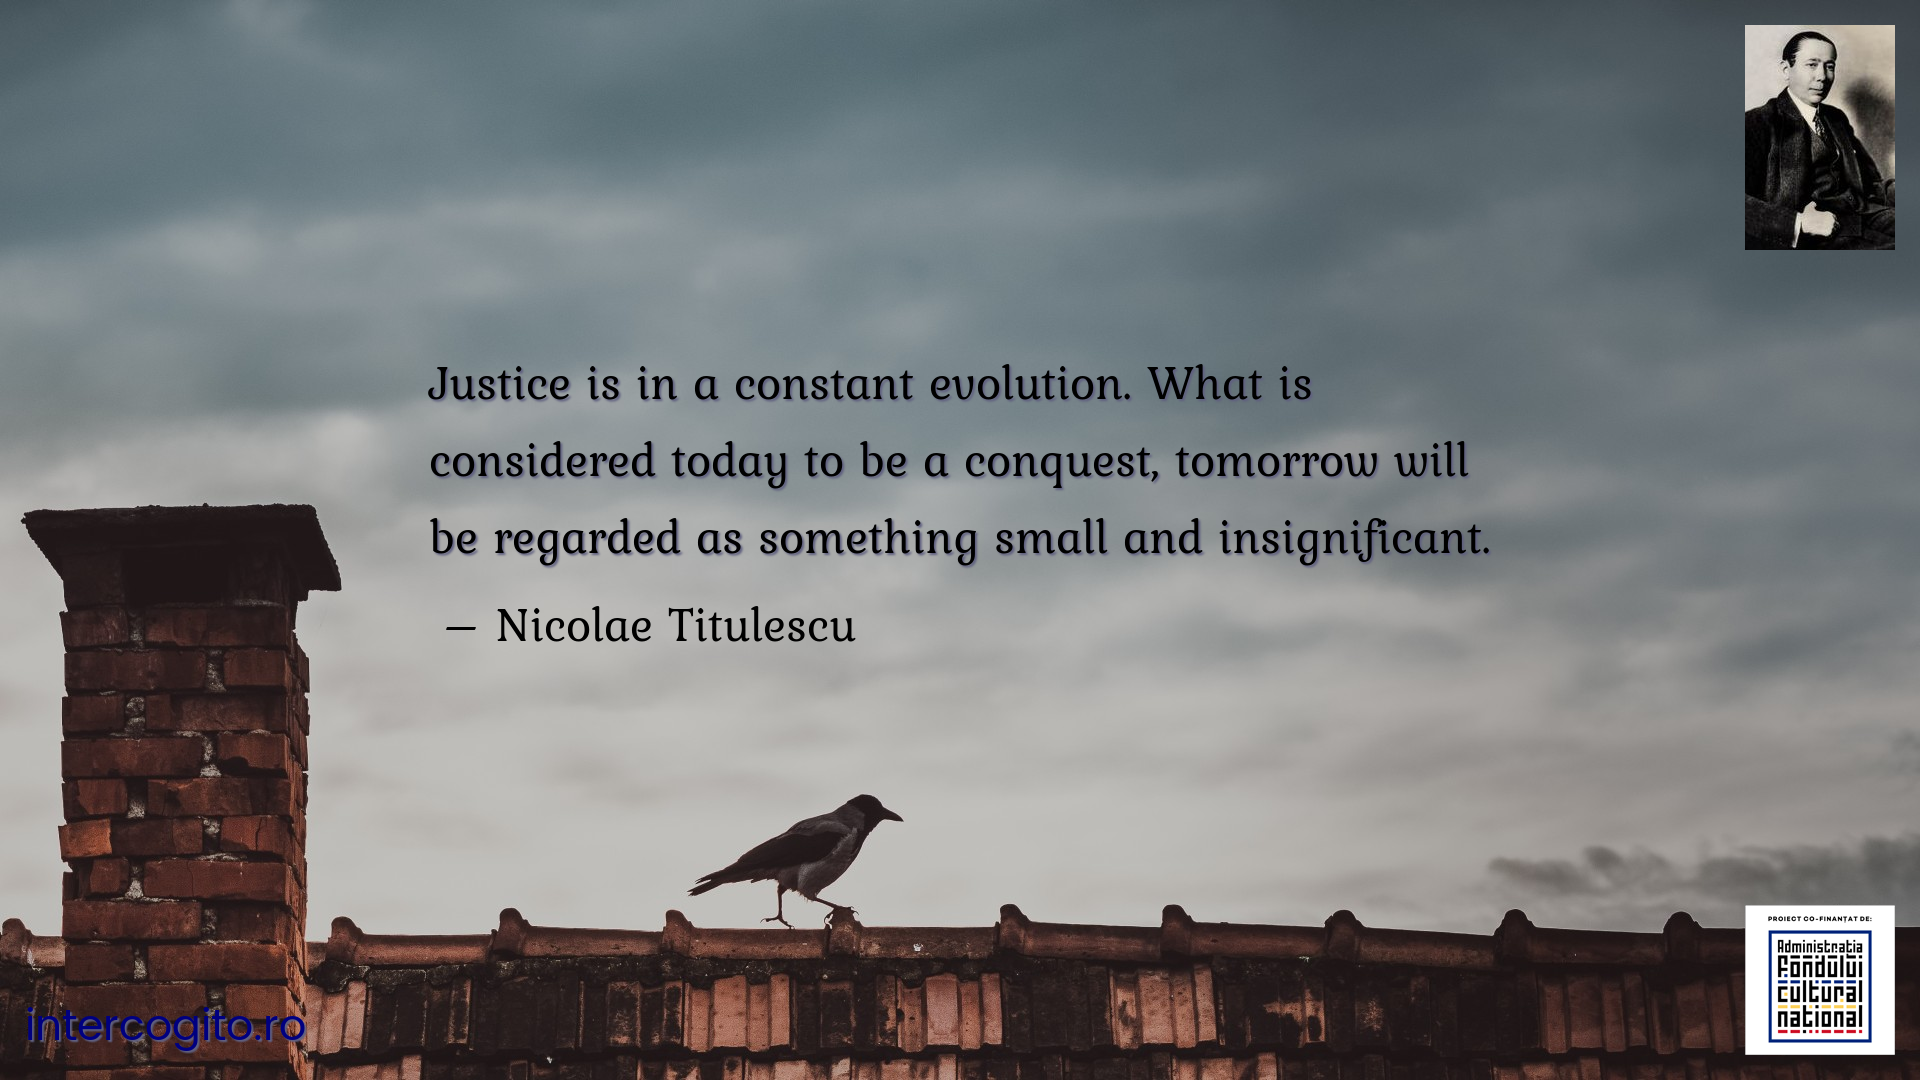 Justice is in a constant evolution. What is considered today to be a conquest, tomorrow will be regarded as something small and insignificant.